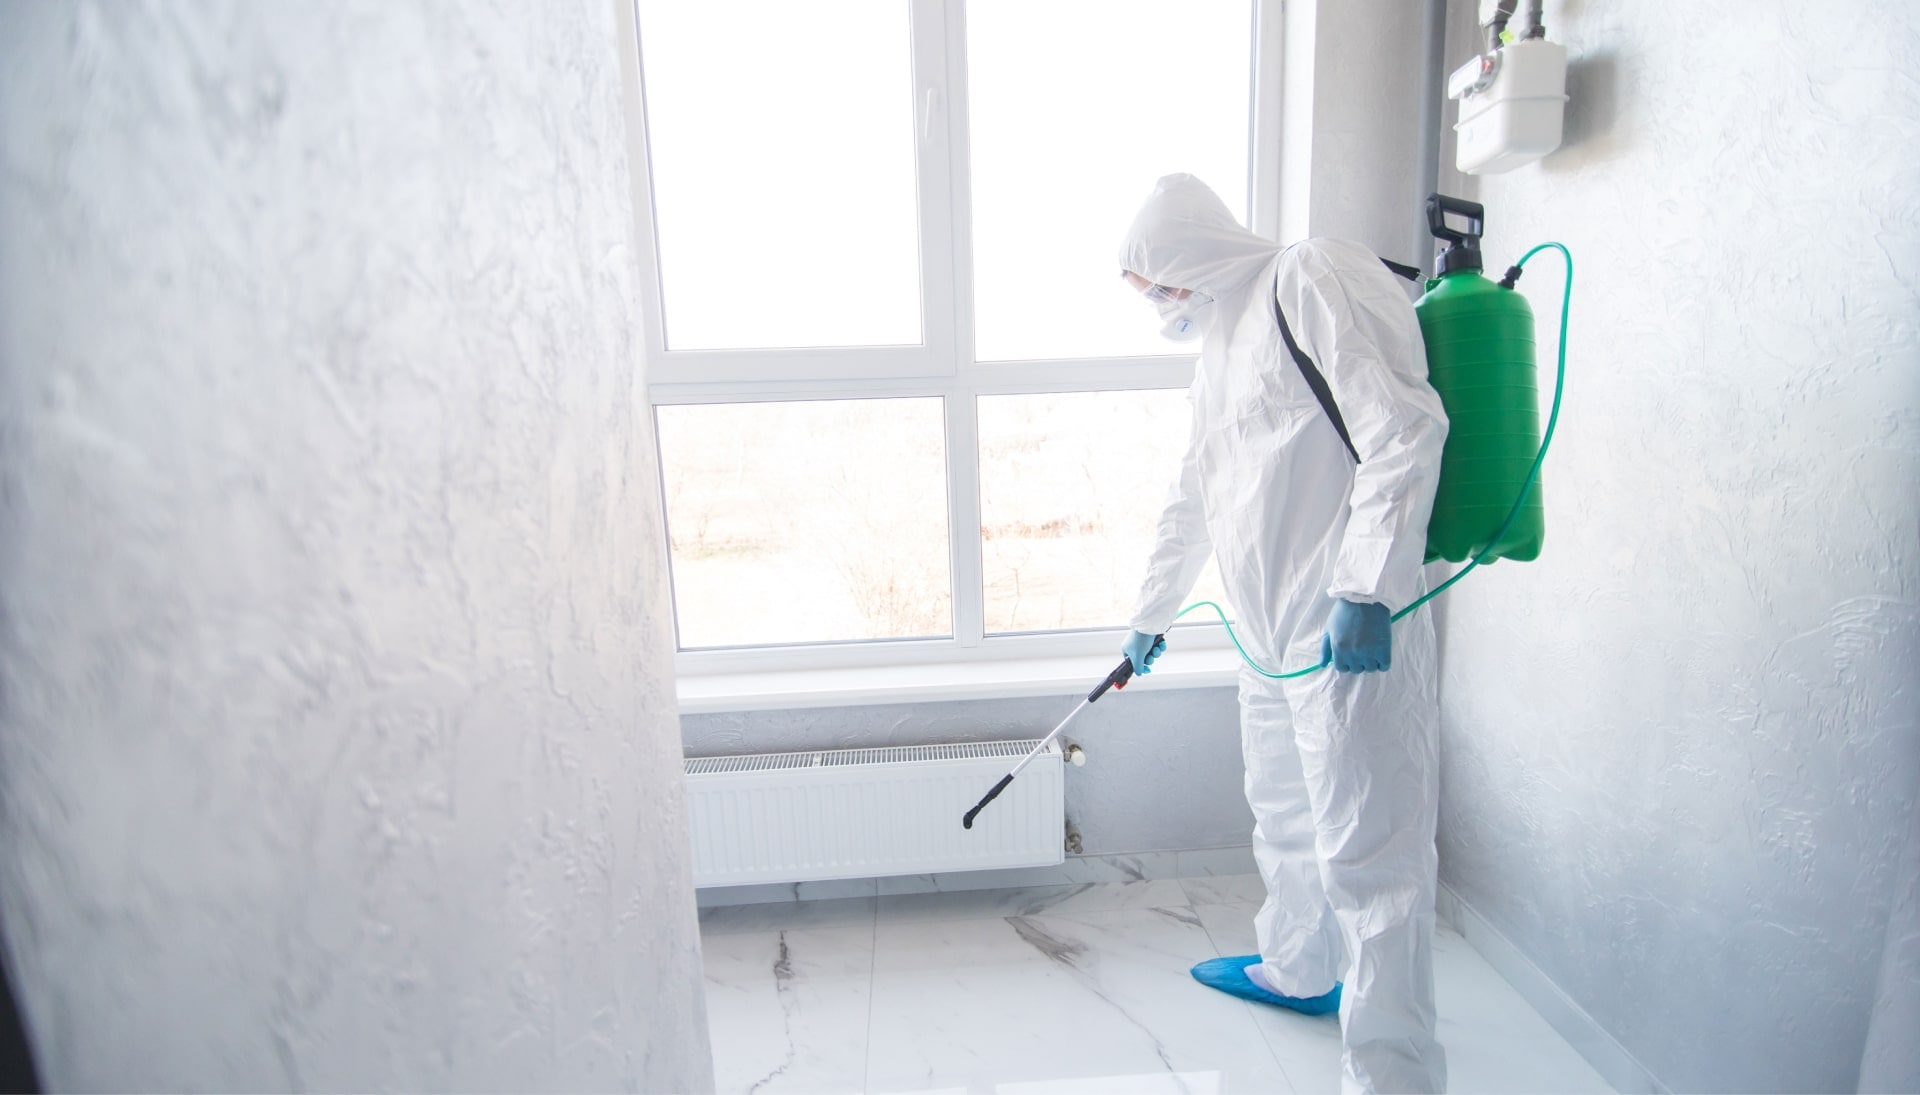 We provide the highest-quality mold inspection, testing, and removal services in the Anchorage, Alaska area.